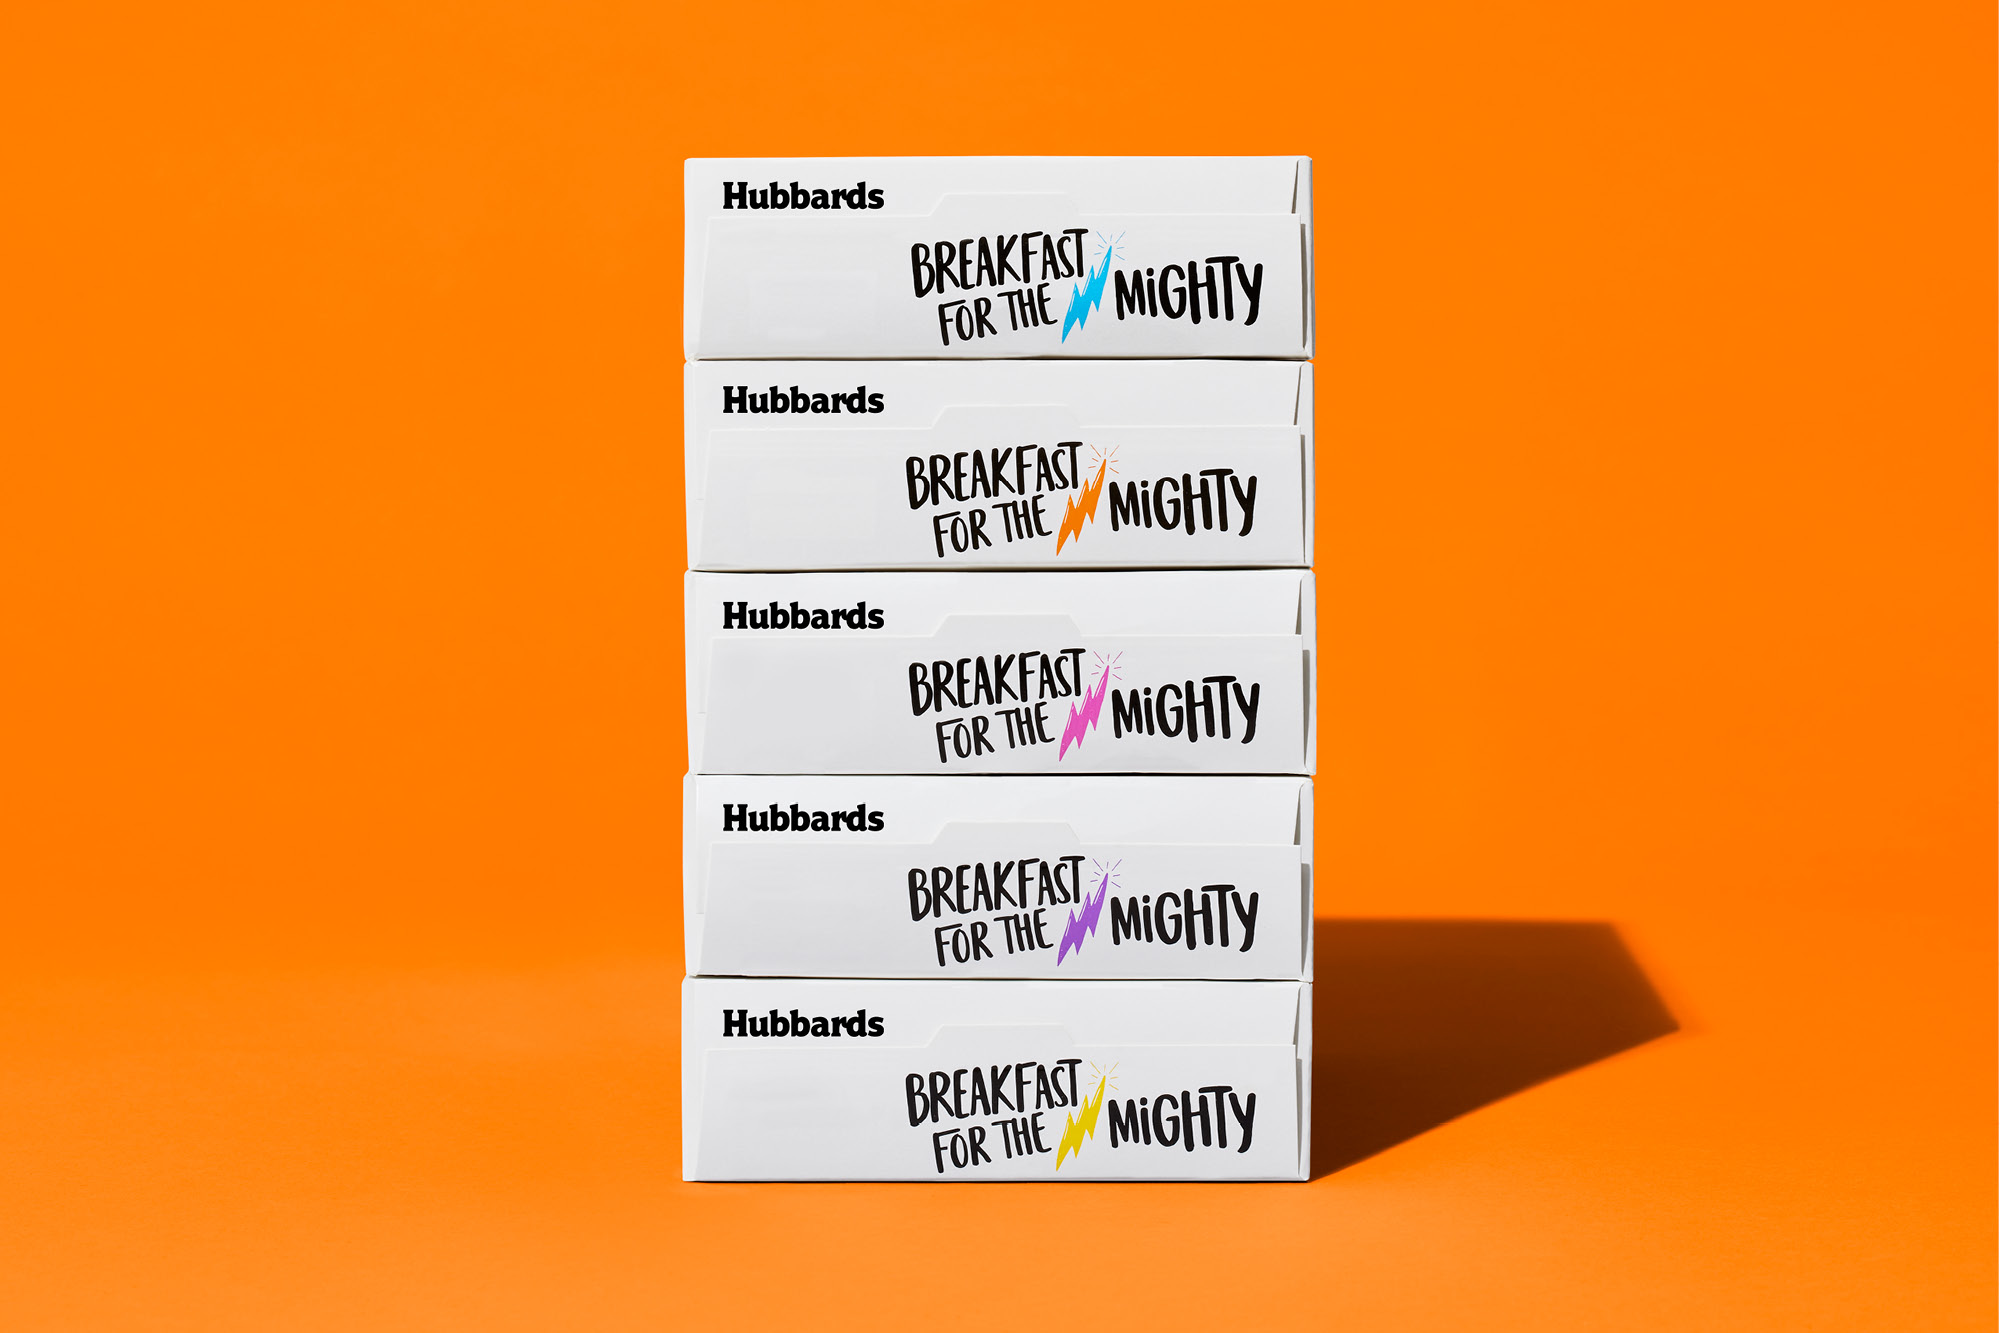 onfire hubbards be mighty granola packaging design 16